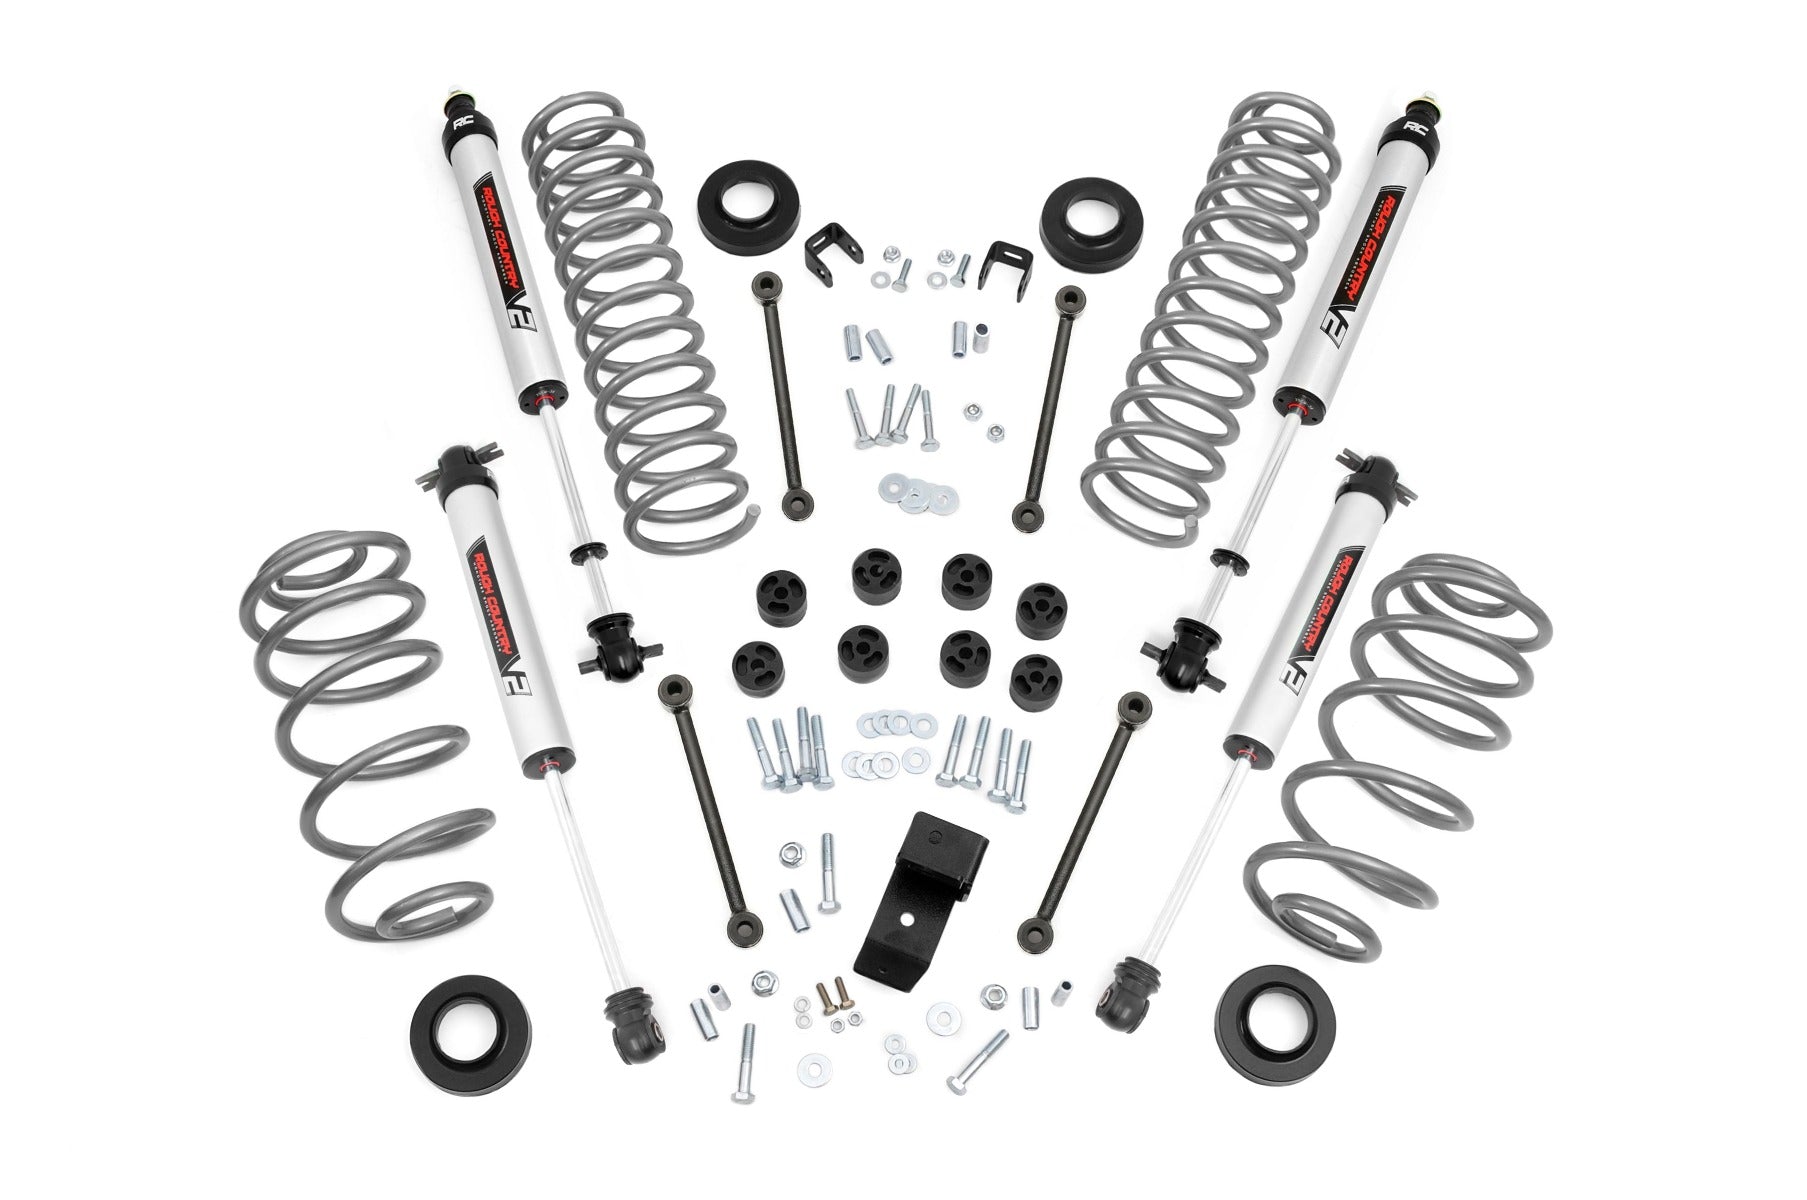  Inch Lift Kit | 6 Cyl | V2 | Jeep Wrangler TJ 4WD (1997-2002) –  Extreme Performance & Offroad